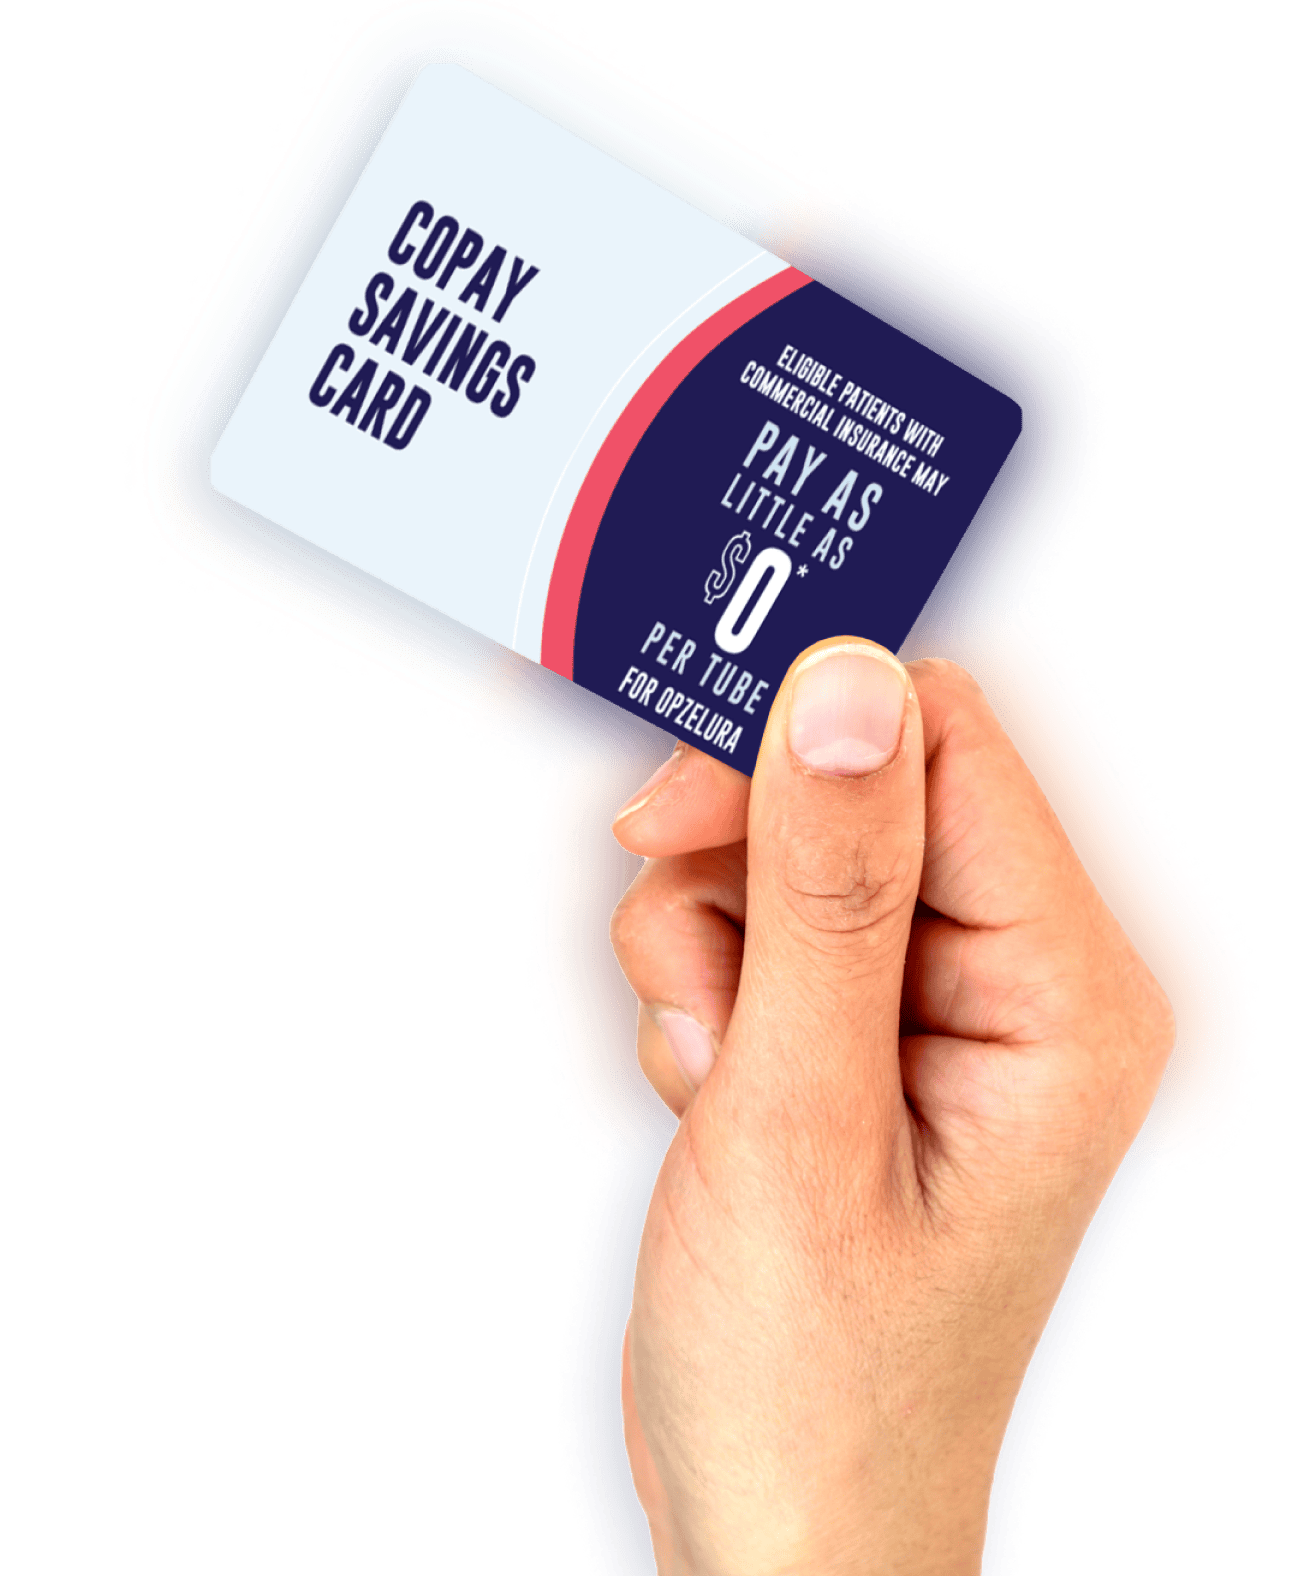 Hand holding a copay savings card that offers eligible patients using commercial insurance to pay as little as $0 per tube for Opzelura.